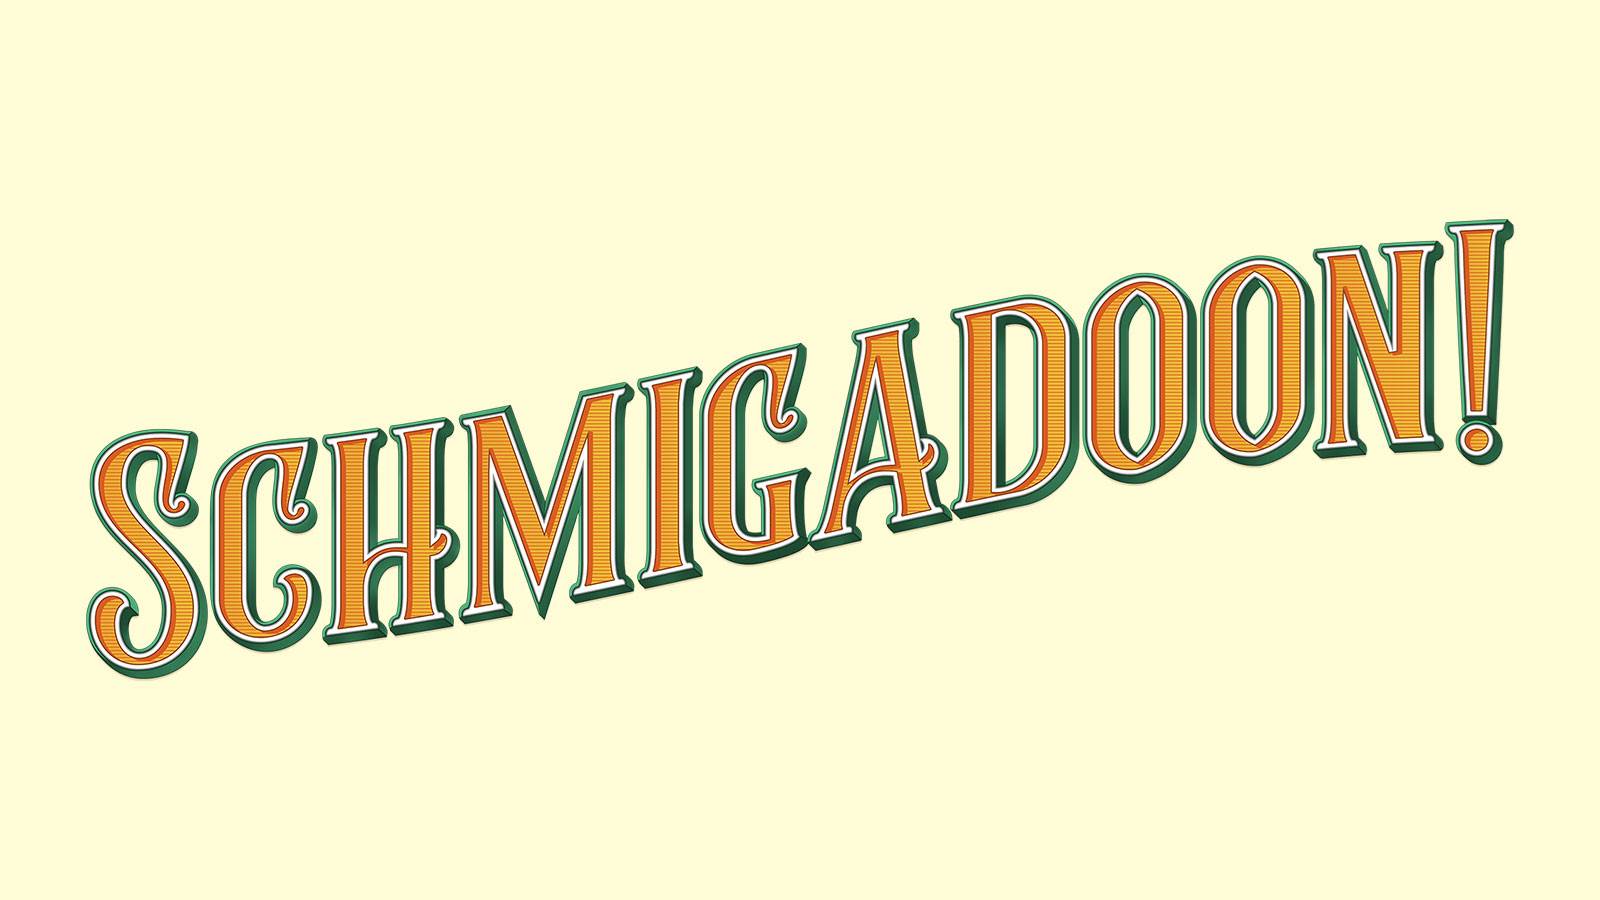 "Schmigadoon!" is written in a orange retro font with a green outline. It is on a yellow background. 